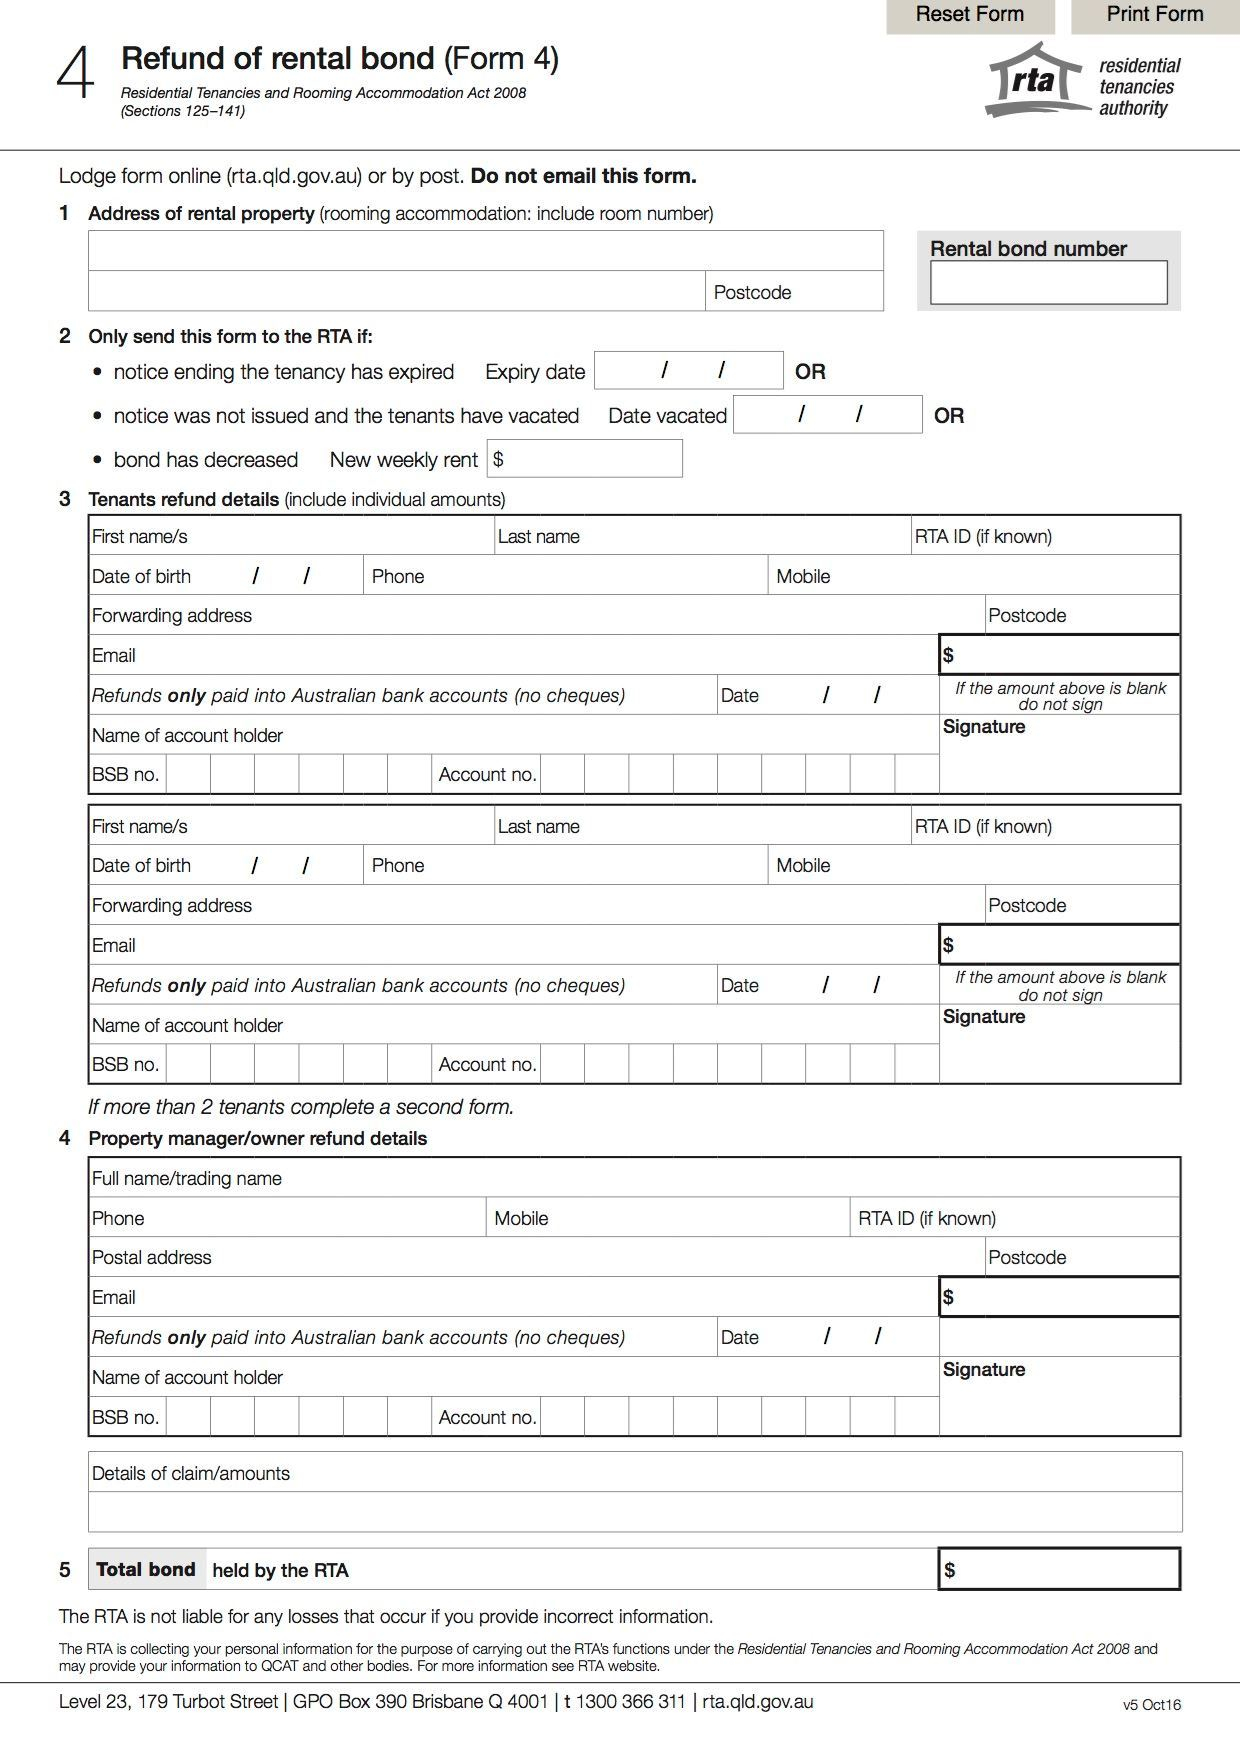 Residential Tenancy Agreement Qld Queensland Refund Of Rental Bond Form 4 Legal Forms And Business